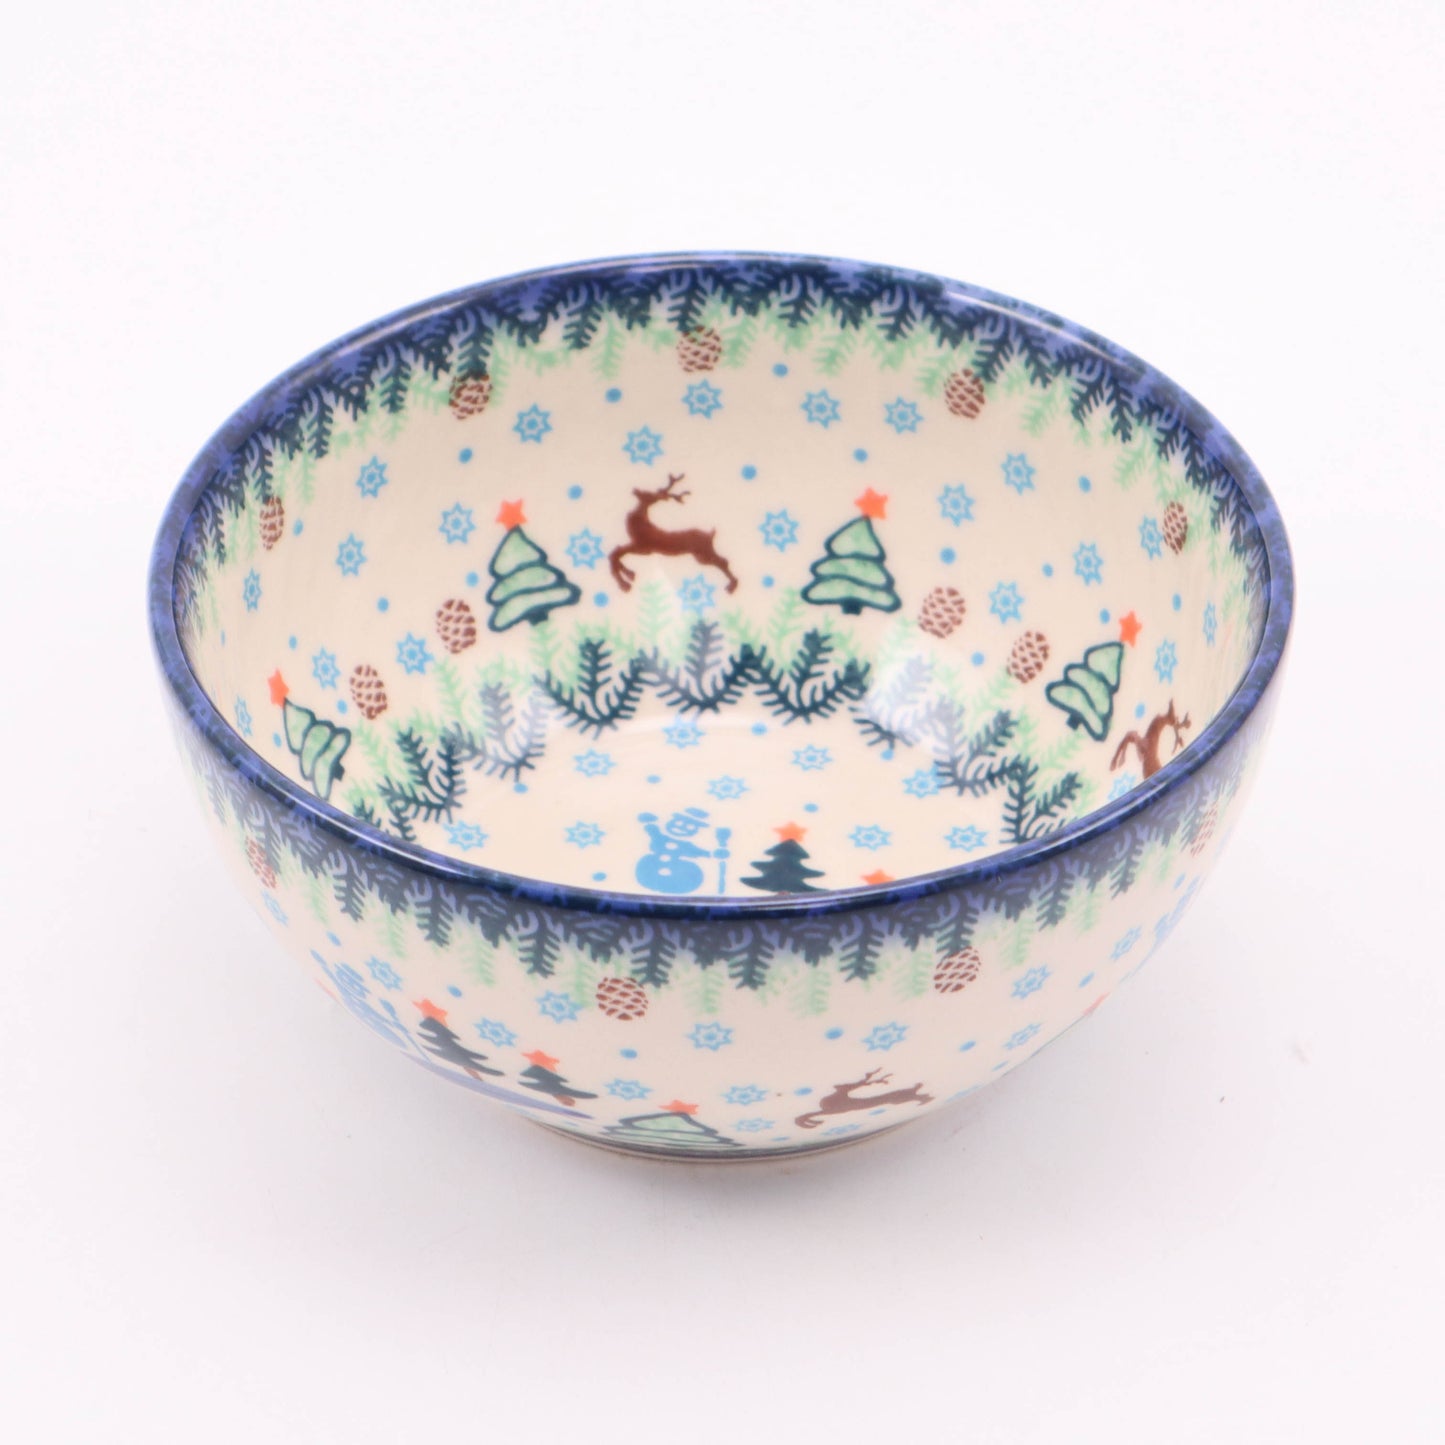 6" Cereal Bowl. Pattern: Merry Merry